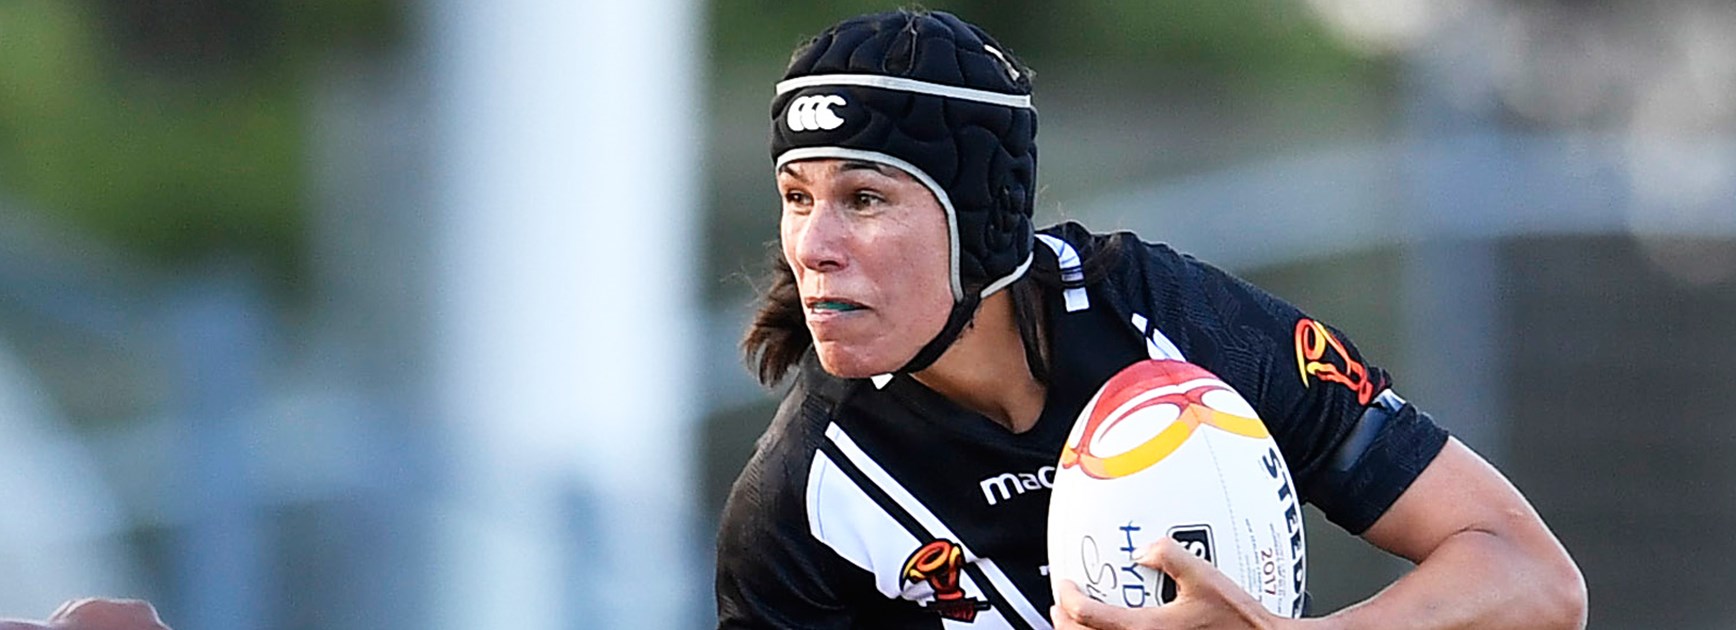 Kiwi Ferns veteran Sharlene Atai will retire after the World Cup Final at the age of 40.